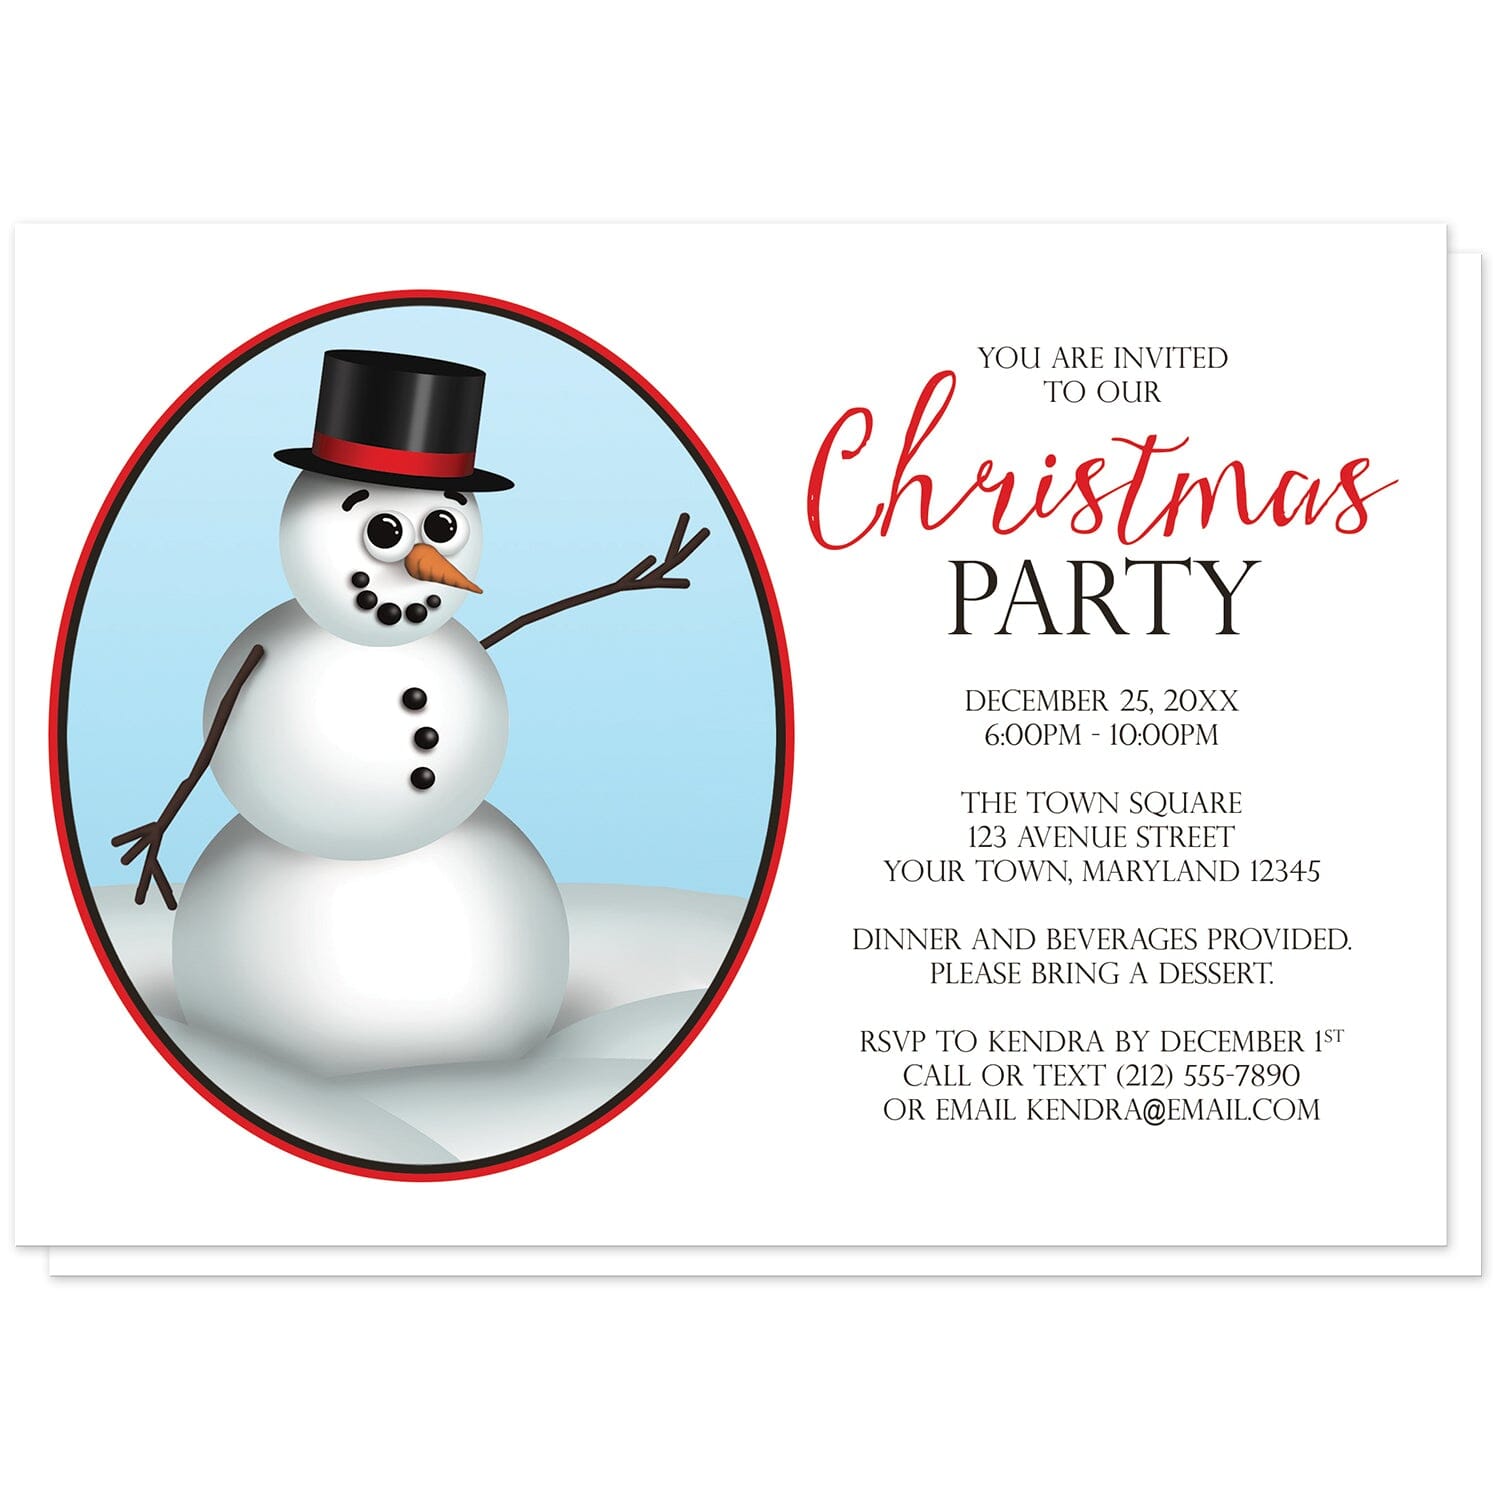 Cute and Classy Snowman Christmas Party Invitations at Artistically Invited. Cute and classy snowman Christmas party invitations in a modern design with an illustration of a cute and classy snowman wearing a black top hat with a red stripe. These invitations are designed for your winter Christmas party, holiday party, or office party celebration.